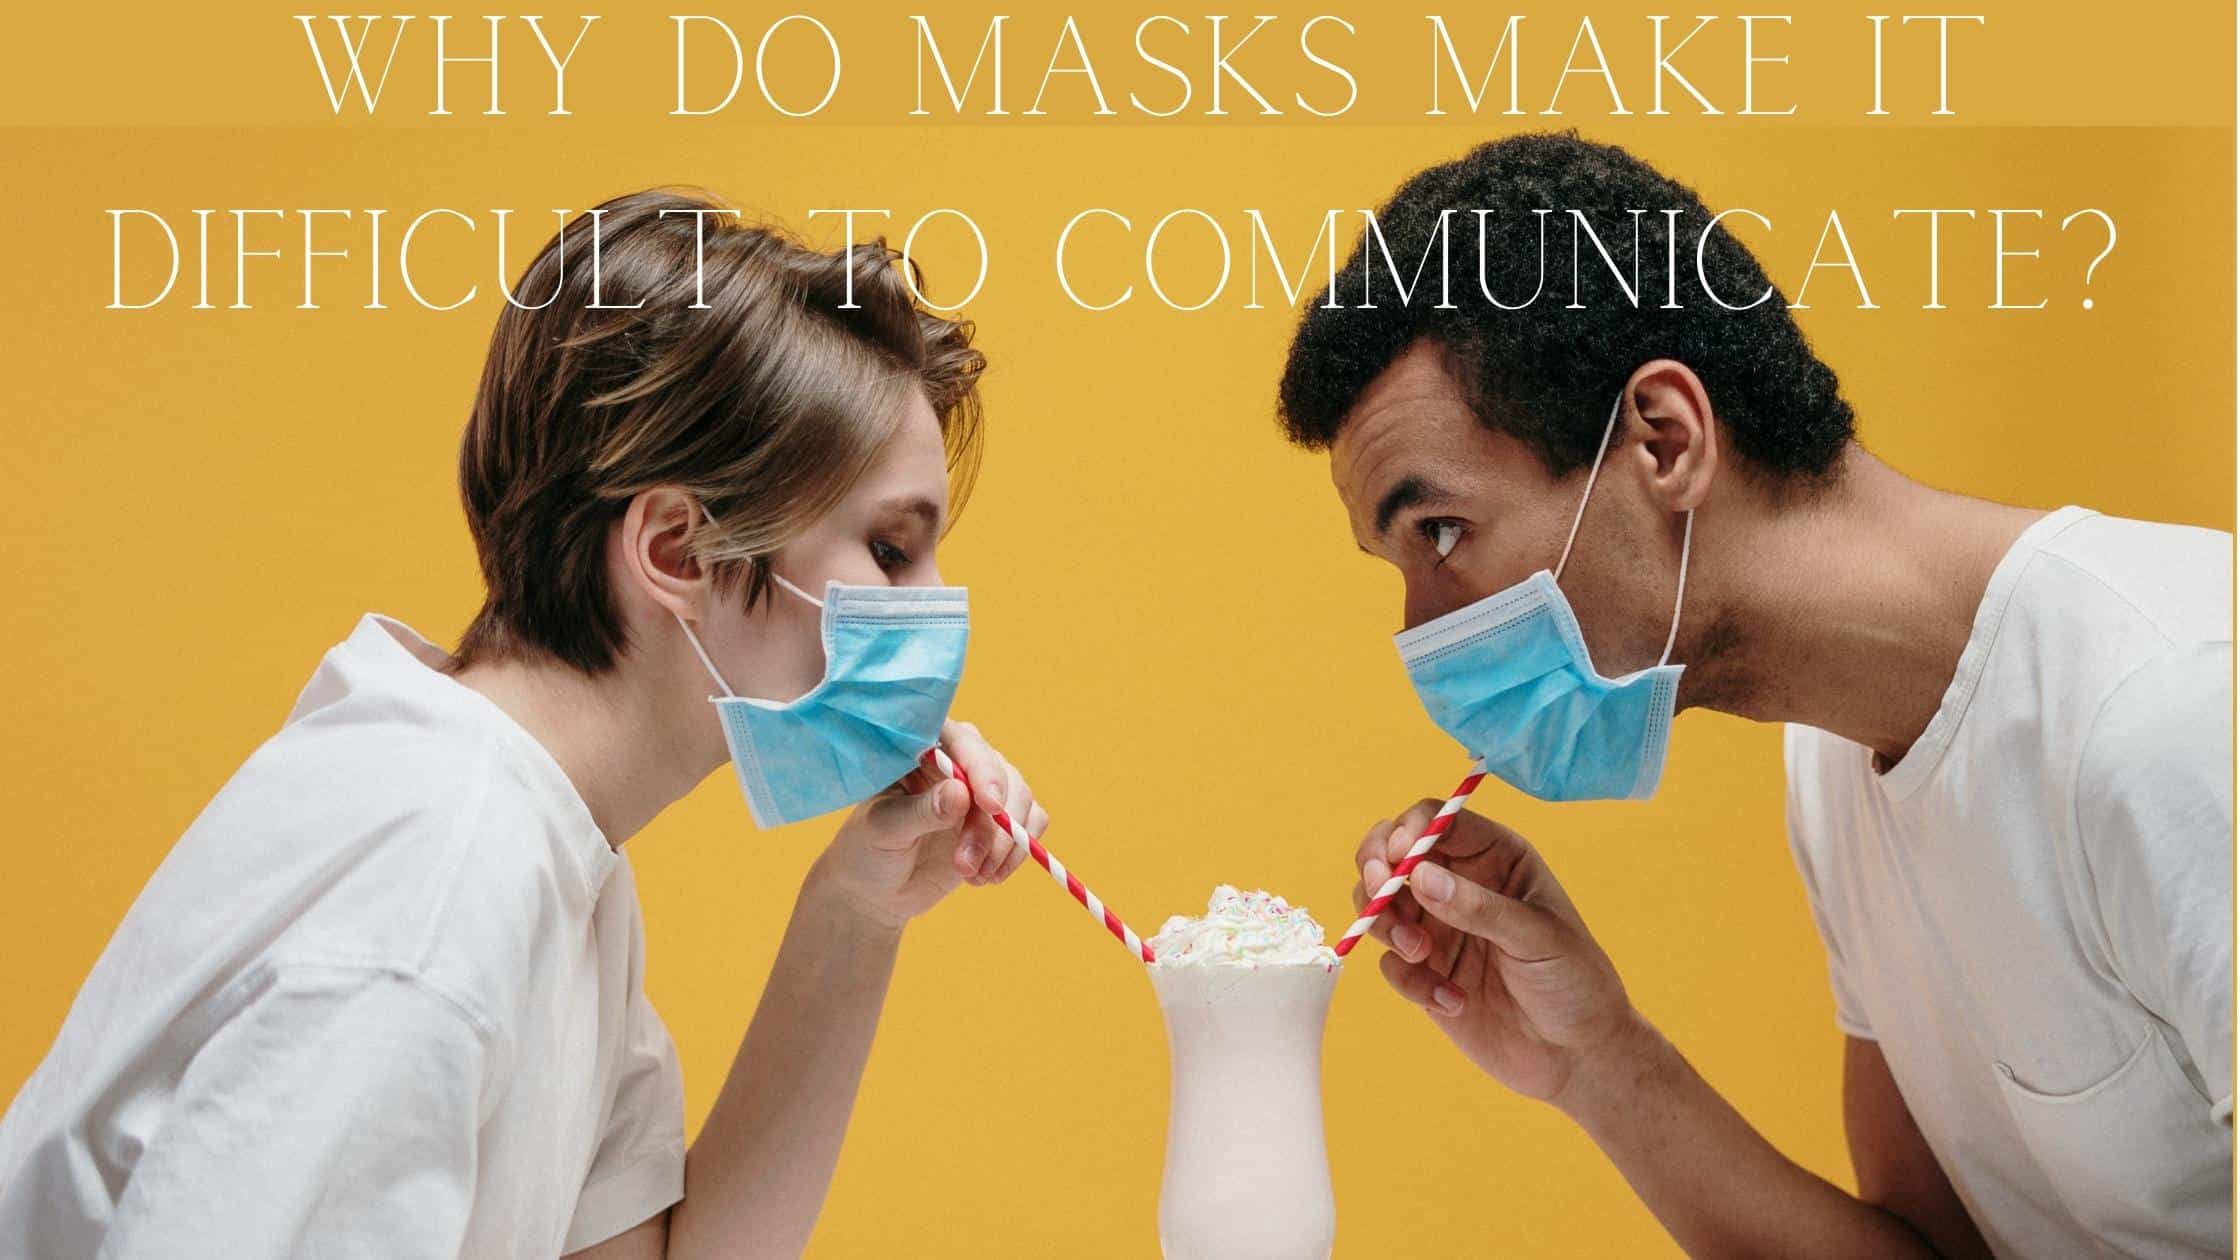 Why Do Masks Make it Difficult to Communicate